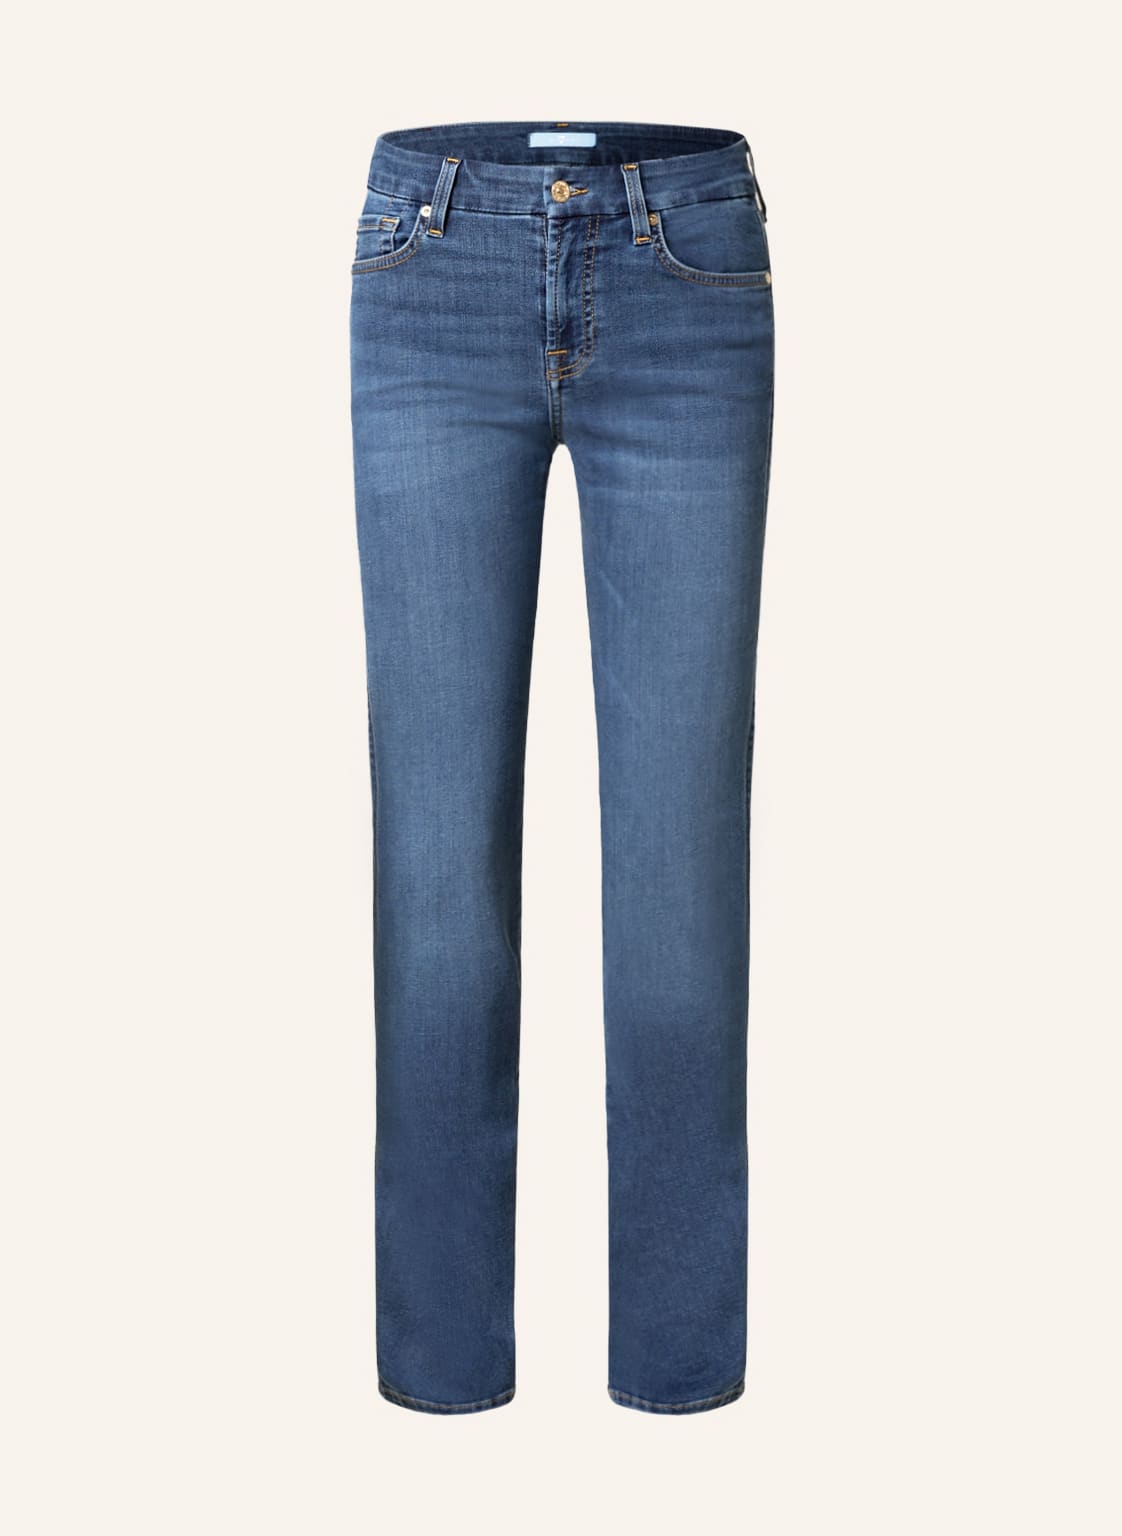 7 For All Mankind Straight Jeans Kimmie blau von 7 For All Mankind